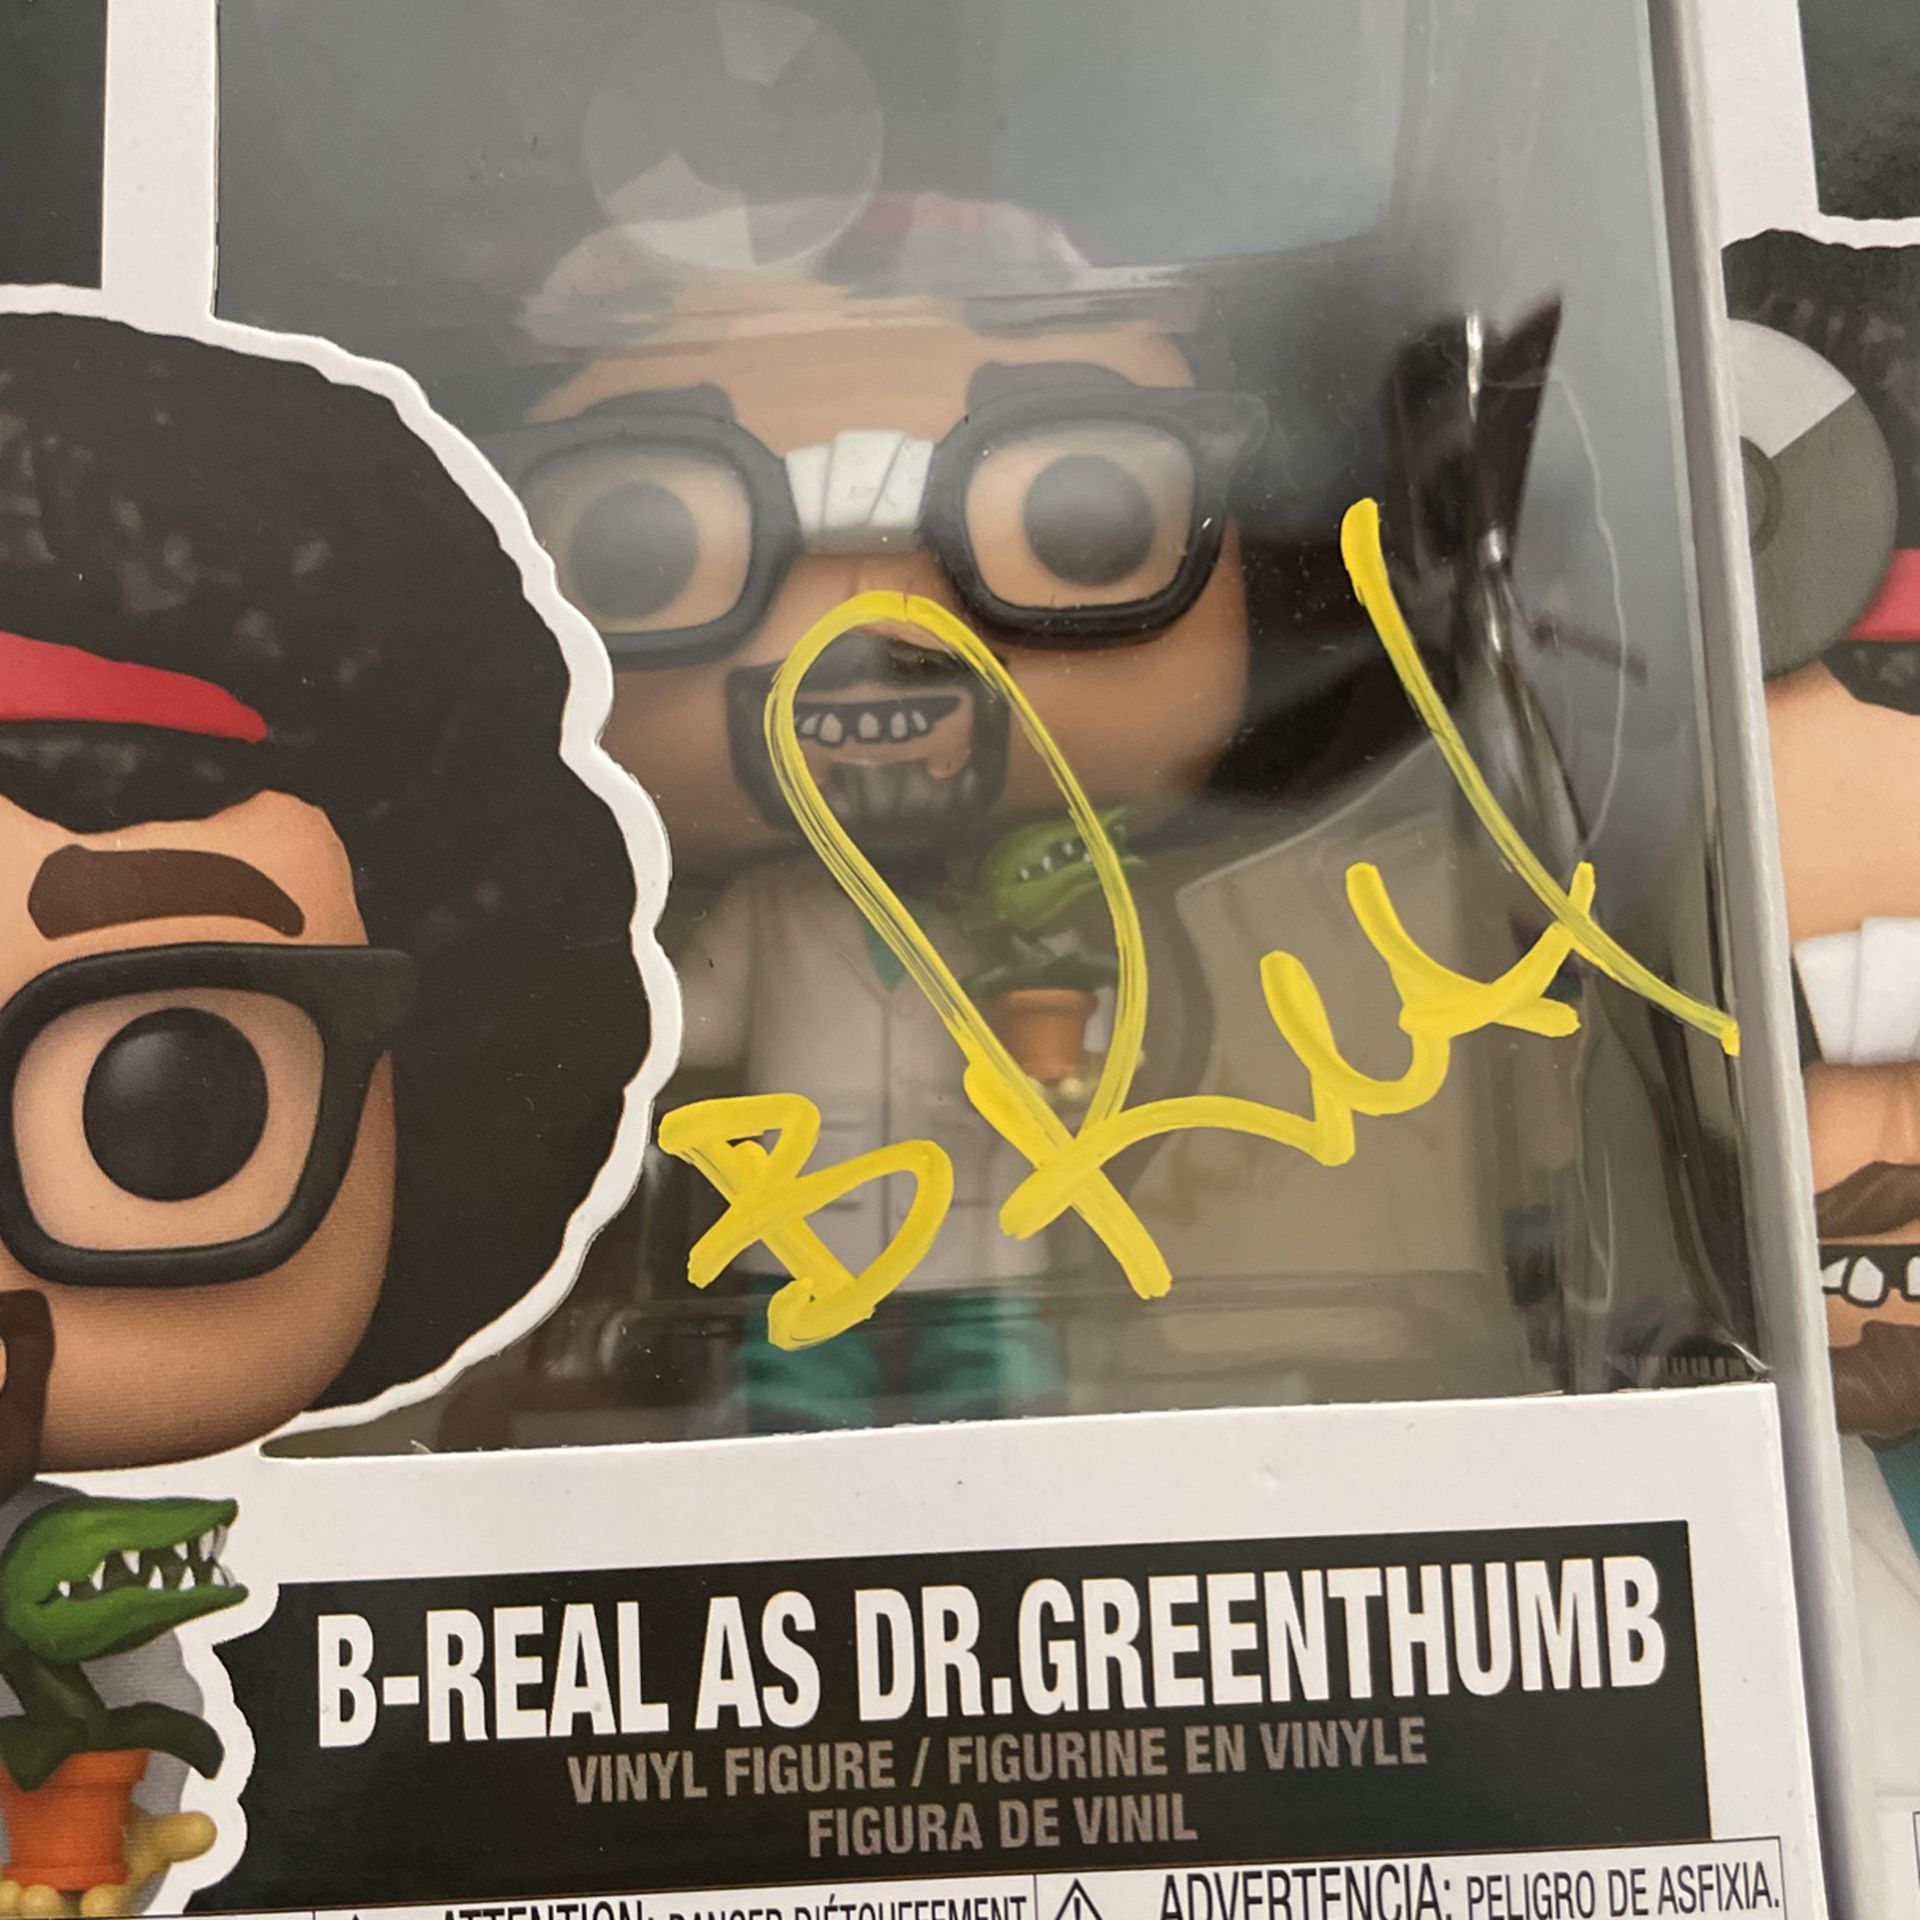 Breal Dr. Greenthumb FunkO Pop Autographed 